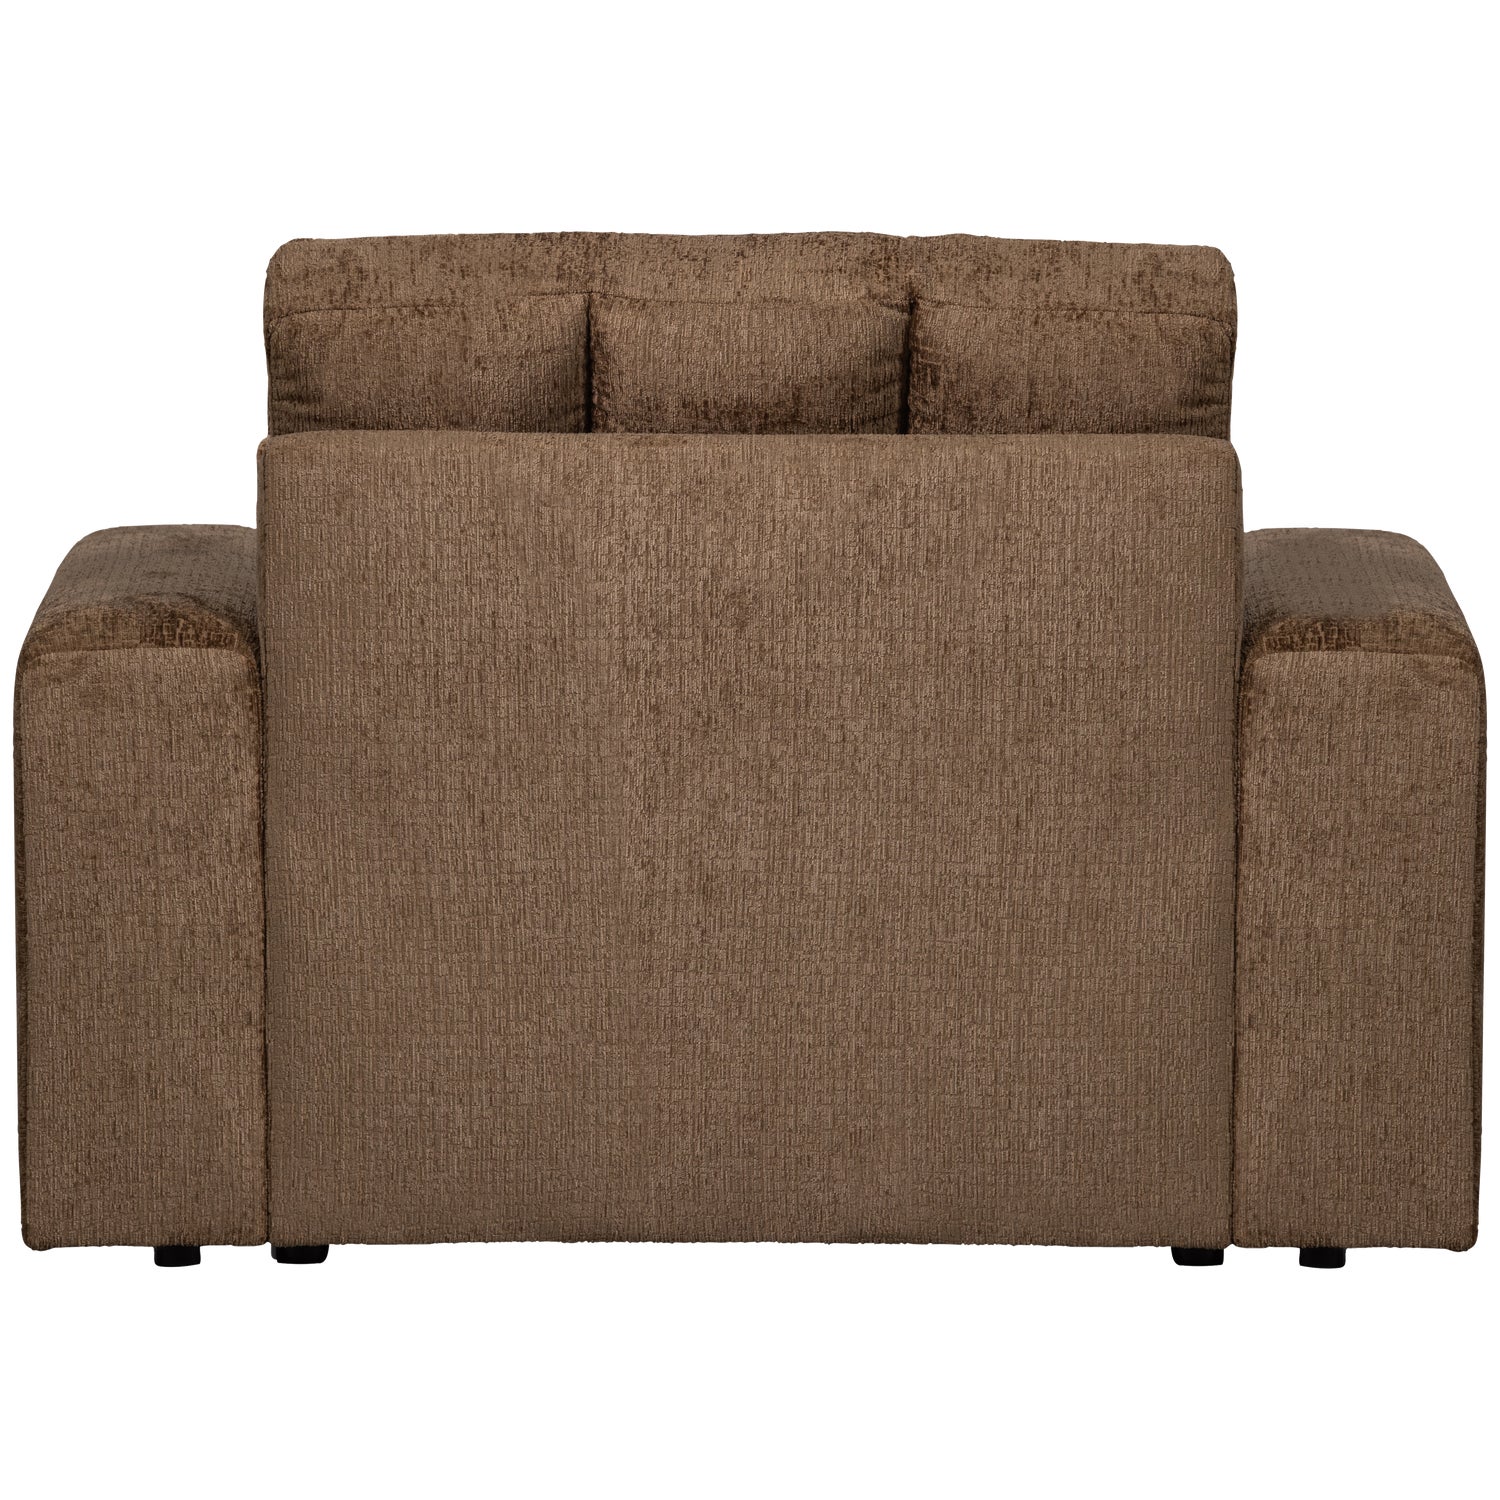 379003-BR-02_VS_WE_Second_date_fauteuil_structure_velvet_brass_AK1.png?auto=webp&format=png&width=1500&height=1500